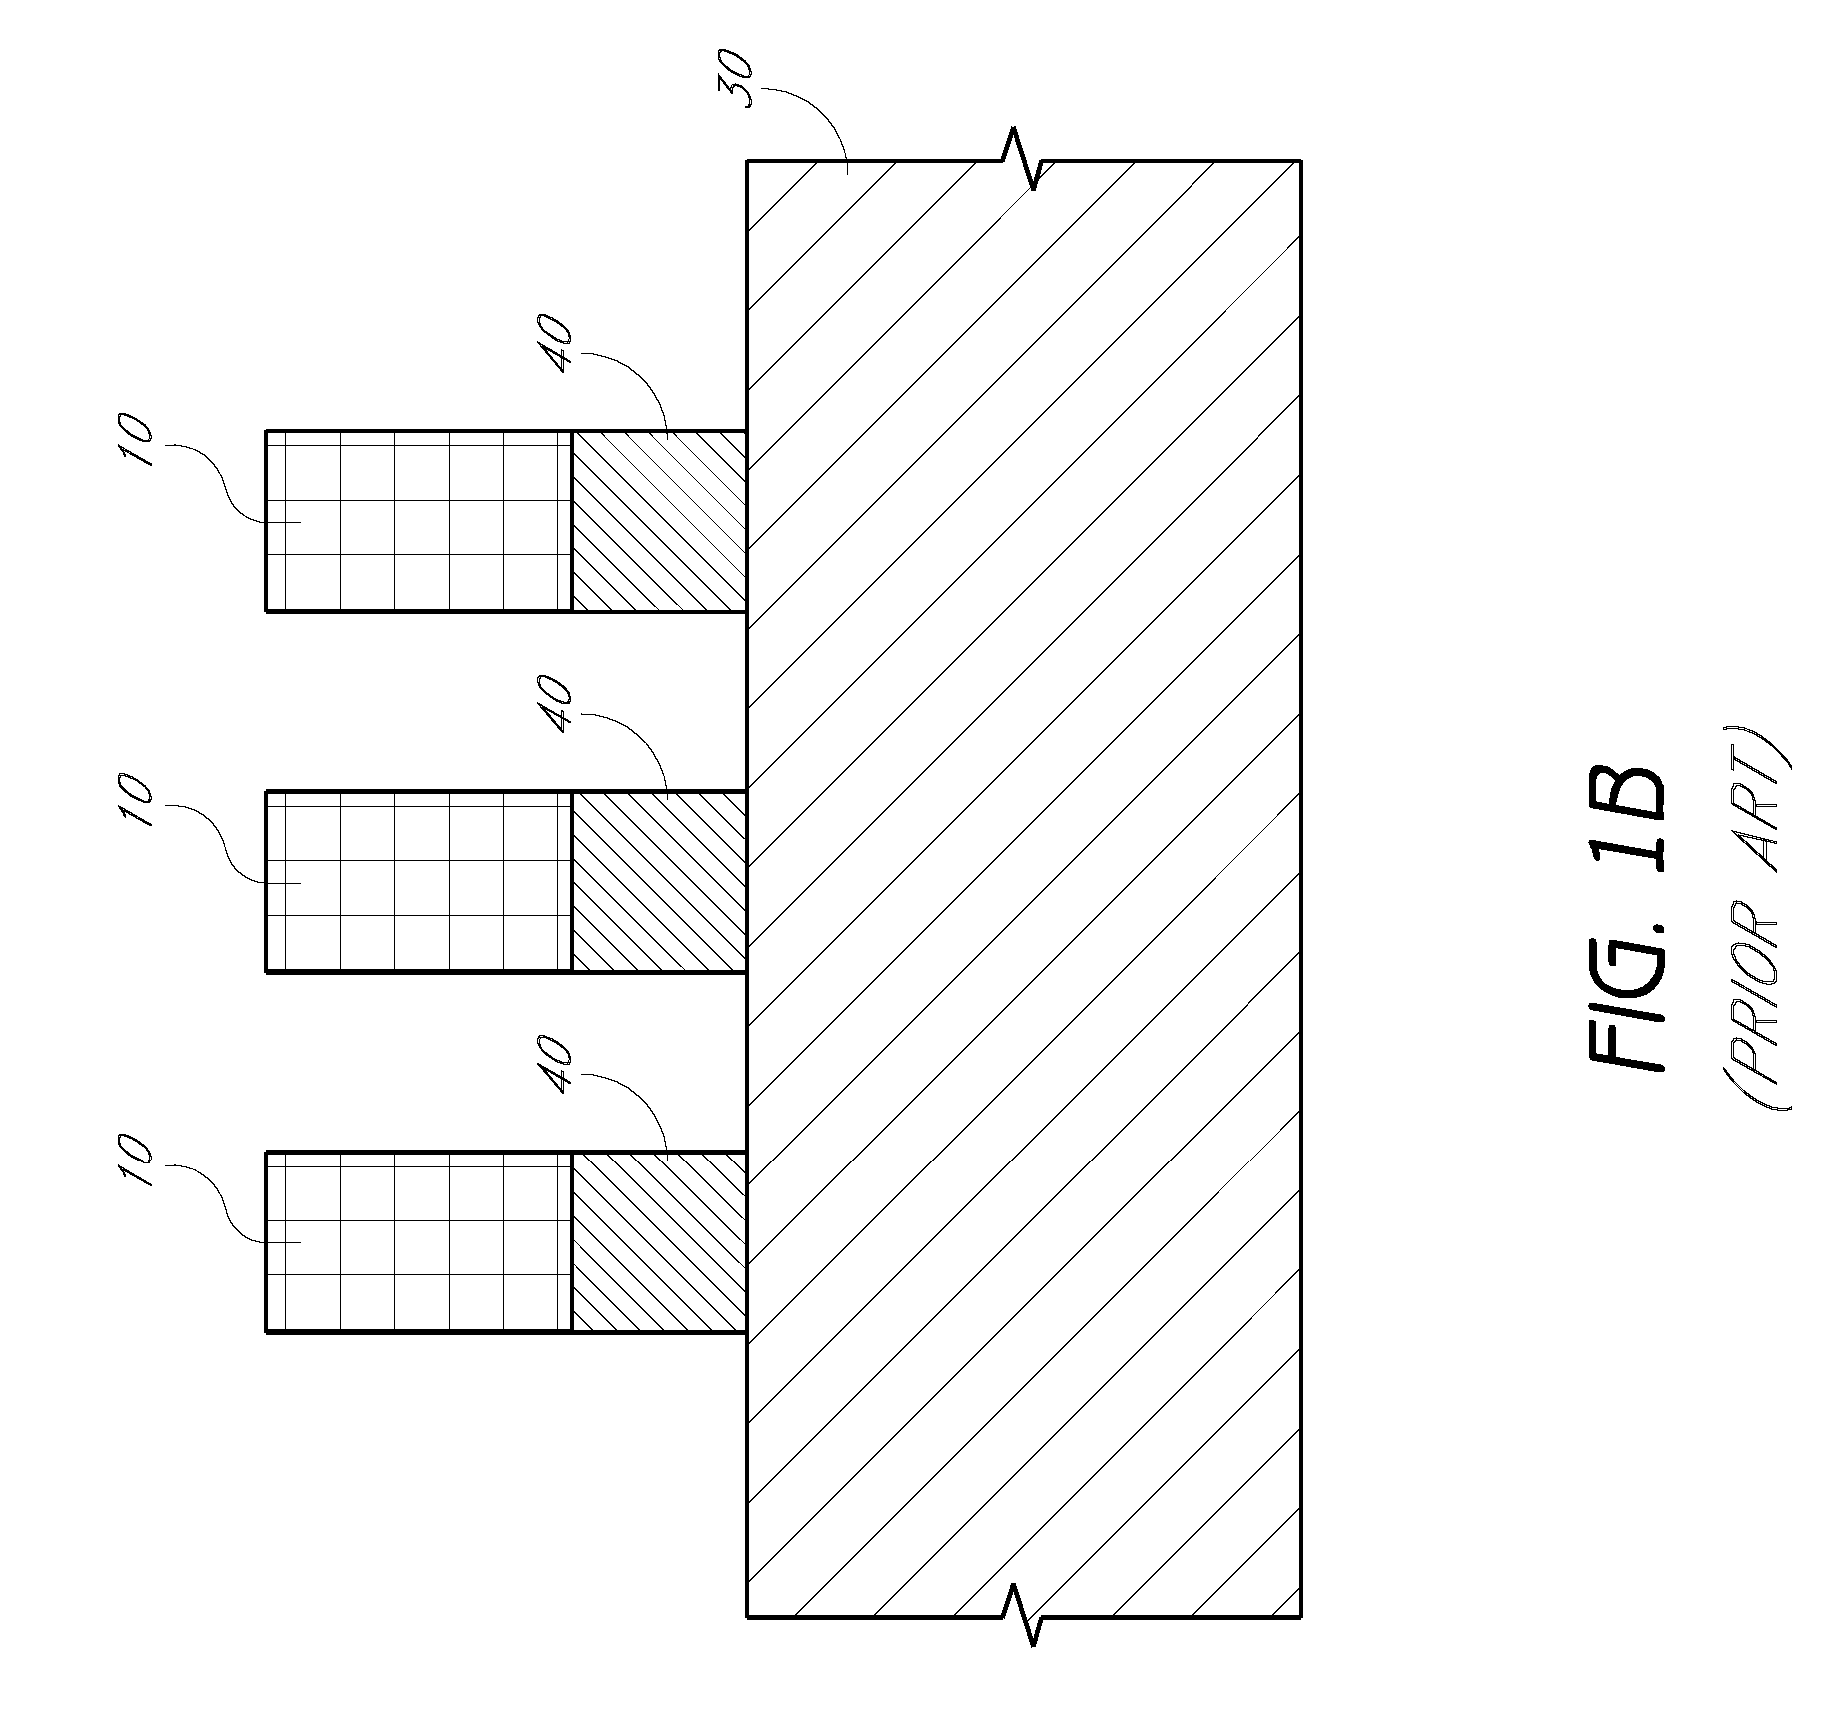 Multiple deposition for integration of spacers in pitch multiplication process